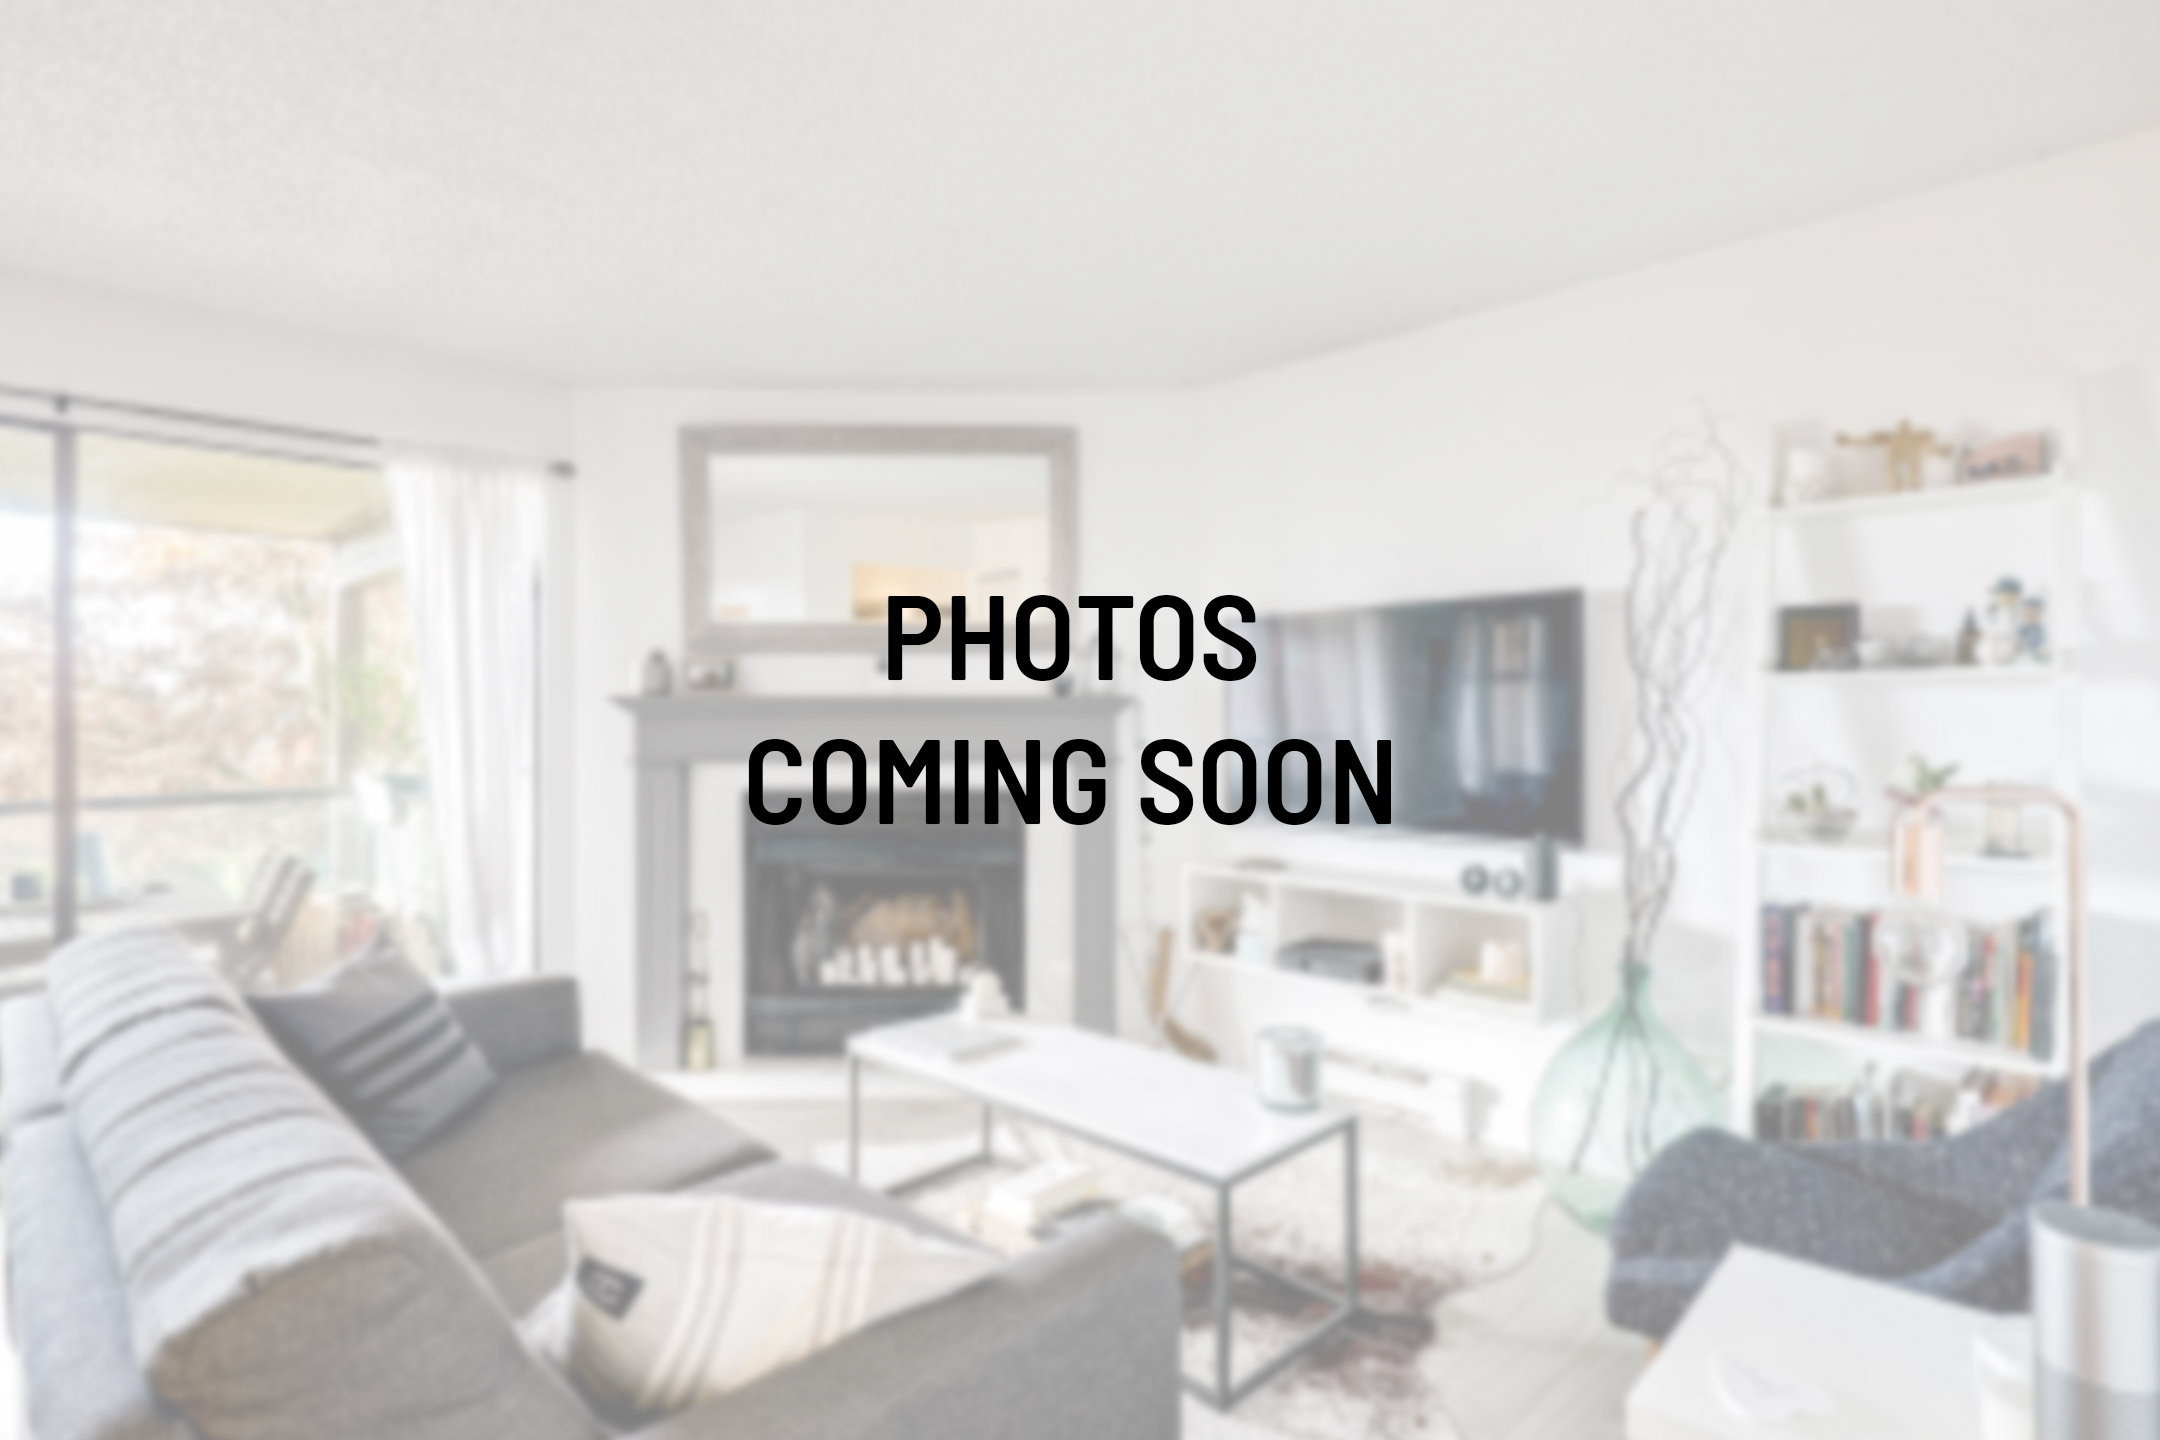 705 1327 East Keith Road, North Vancouver